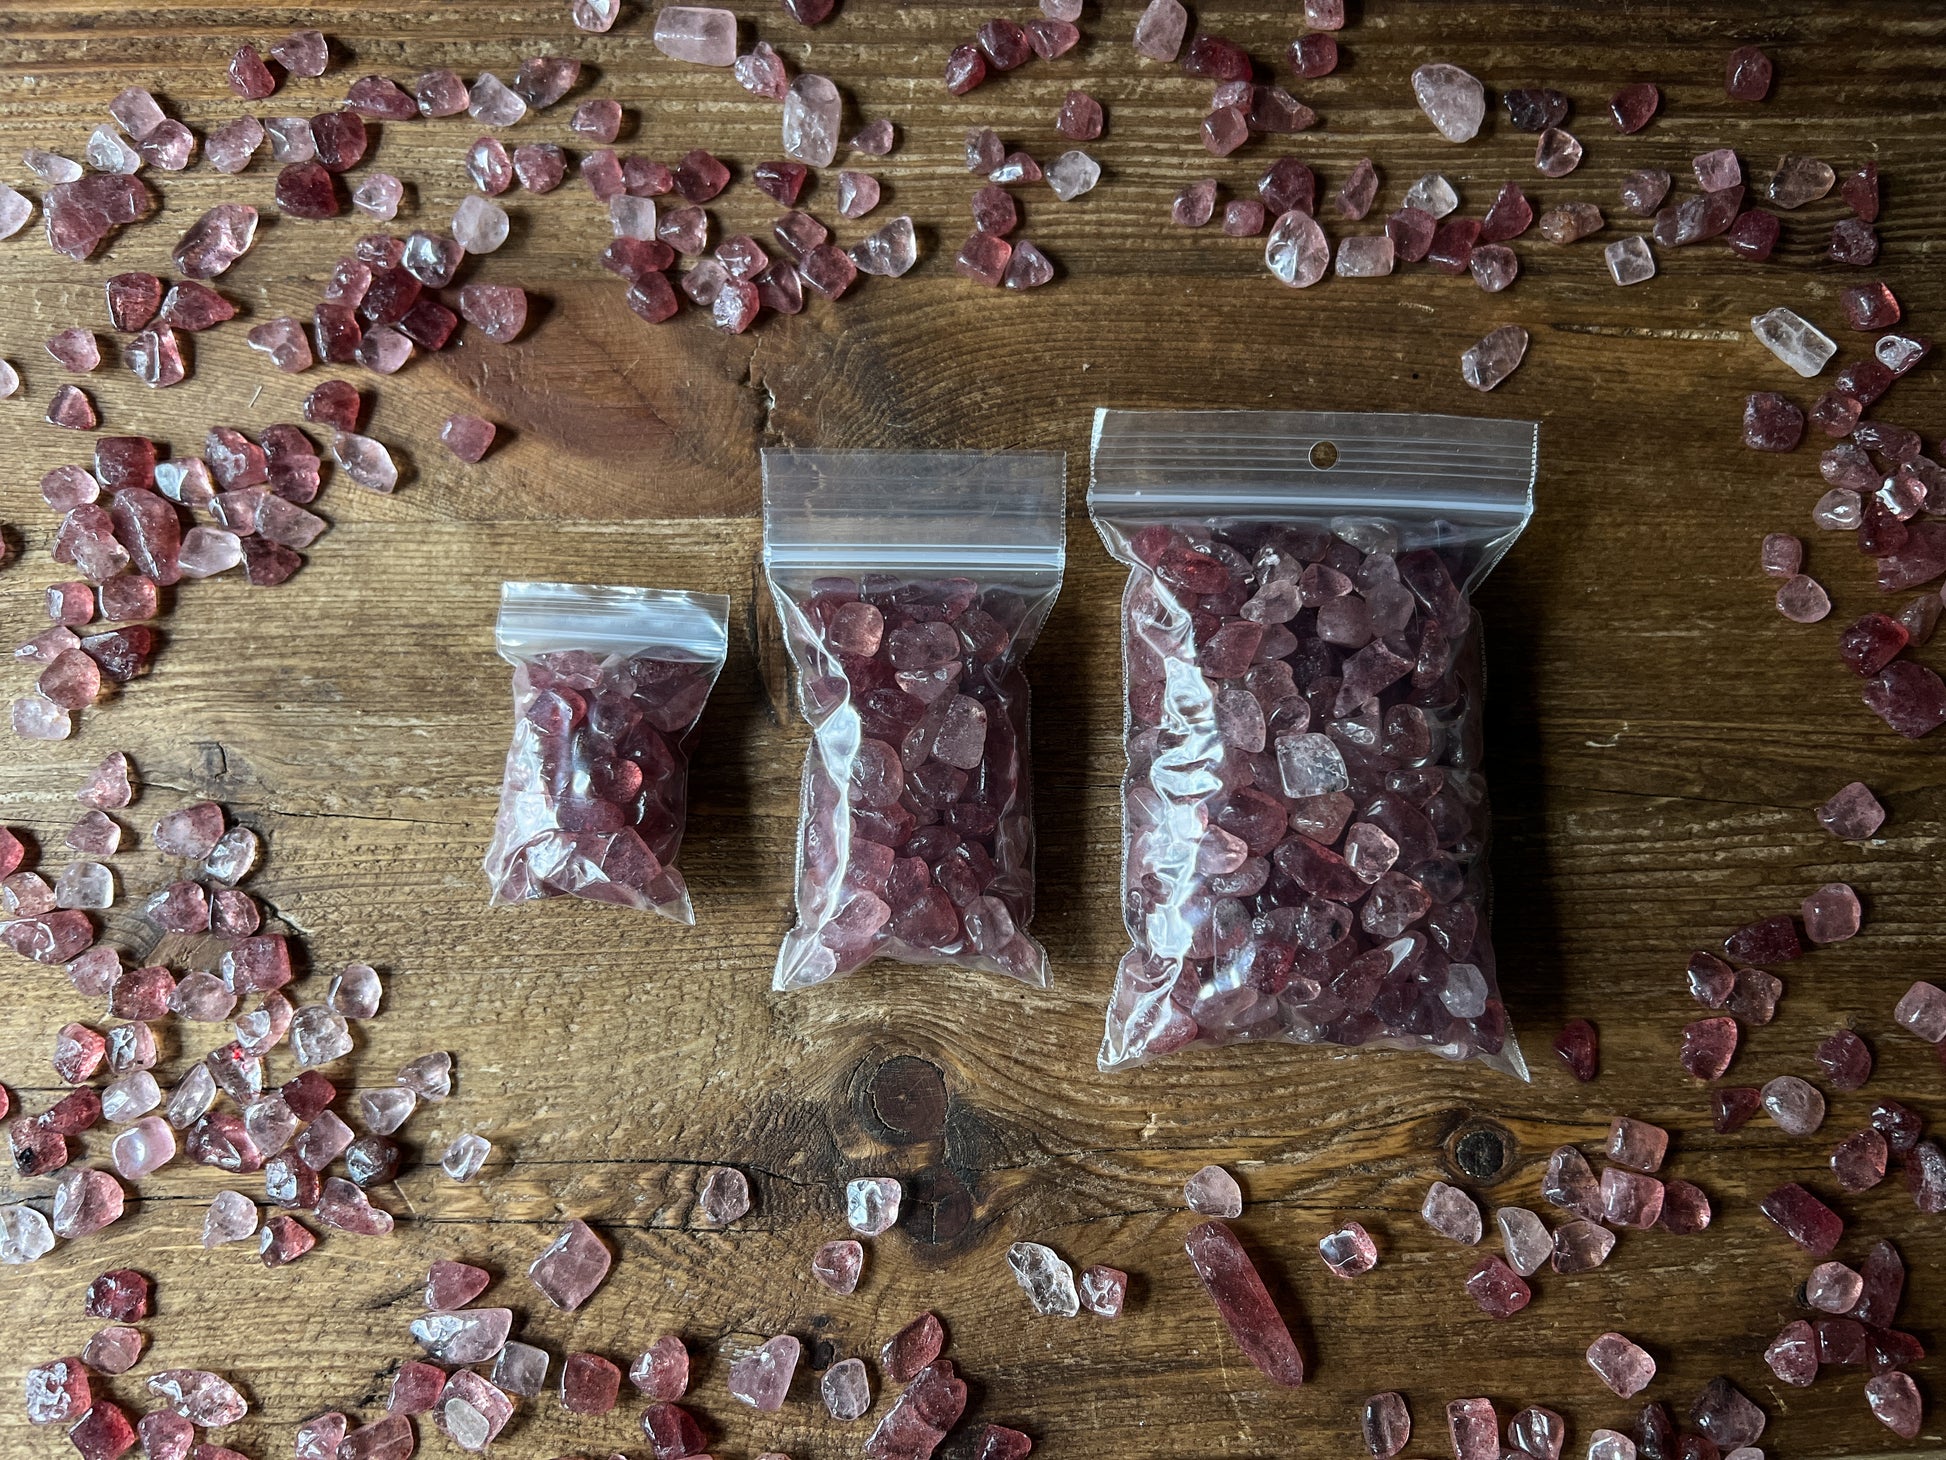 These Strawberry Quartz Chips are great for candle making, crafts, resin jewelry, or to place in jars upon your altar. So many uses for these Mini Stones!